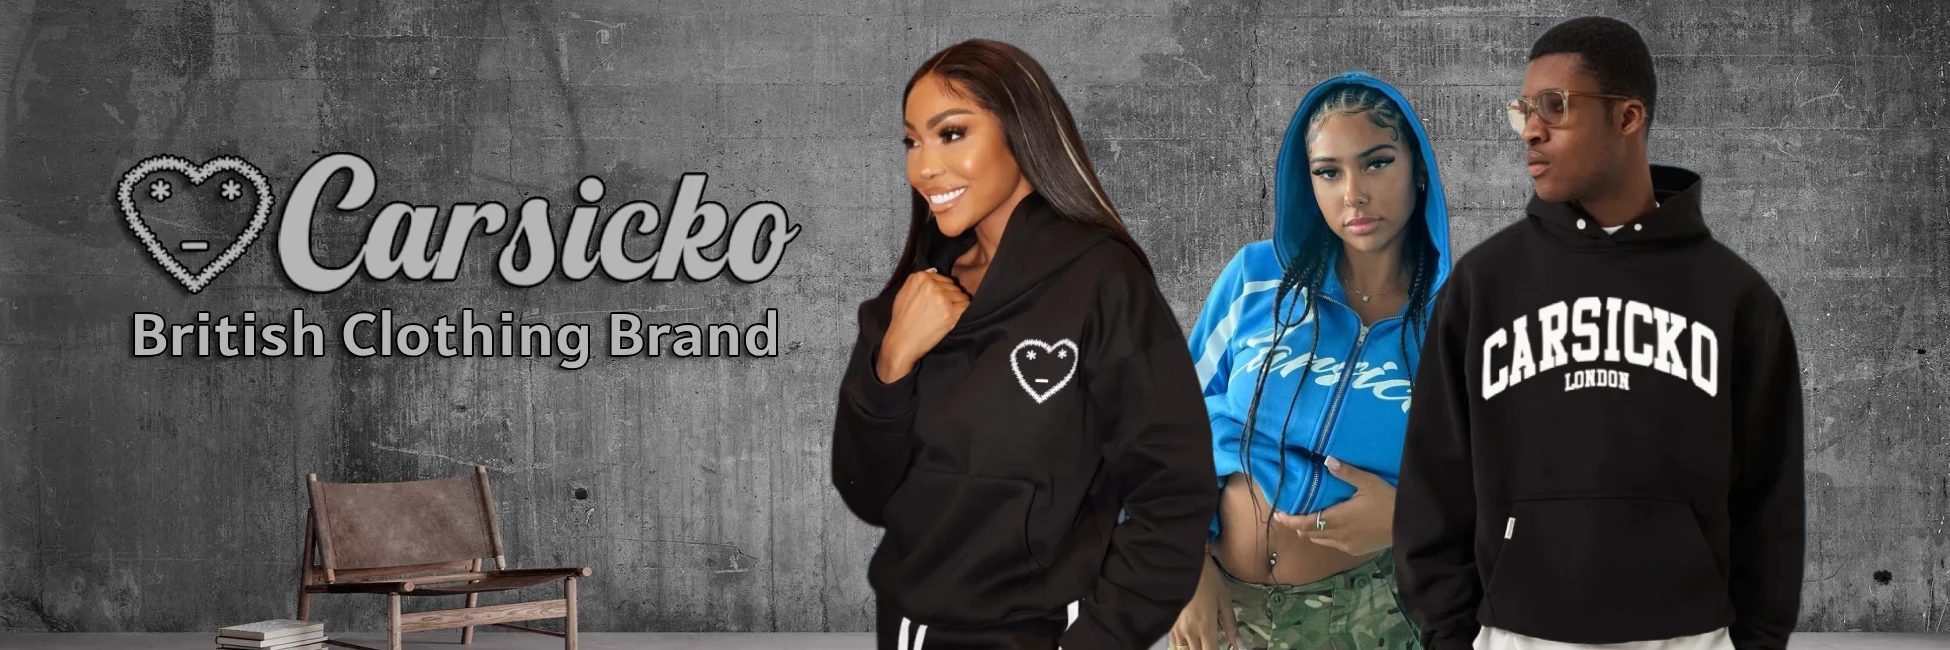 carsicko clothing banner